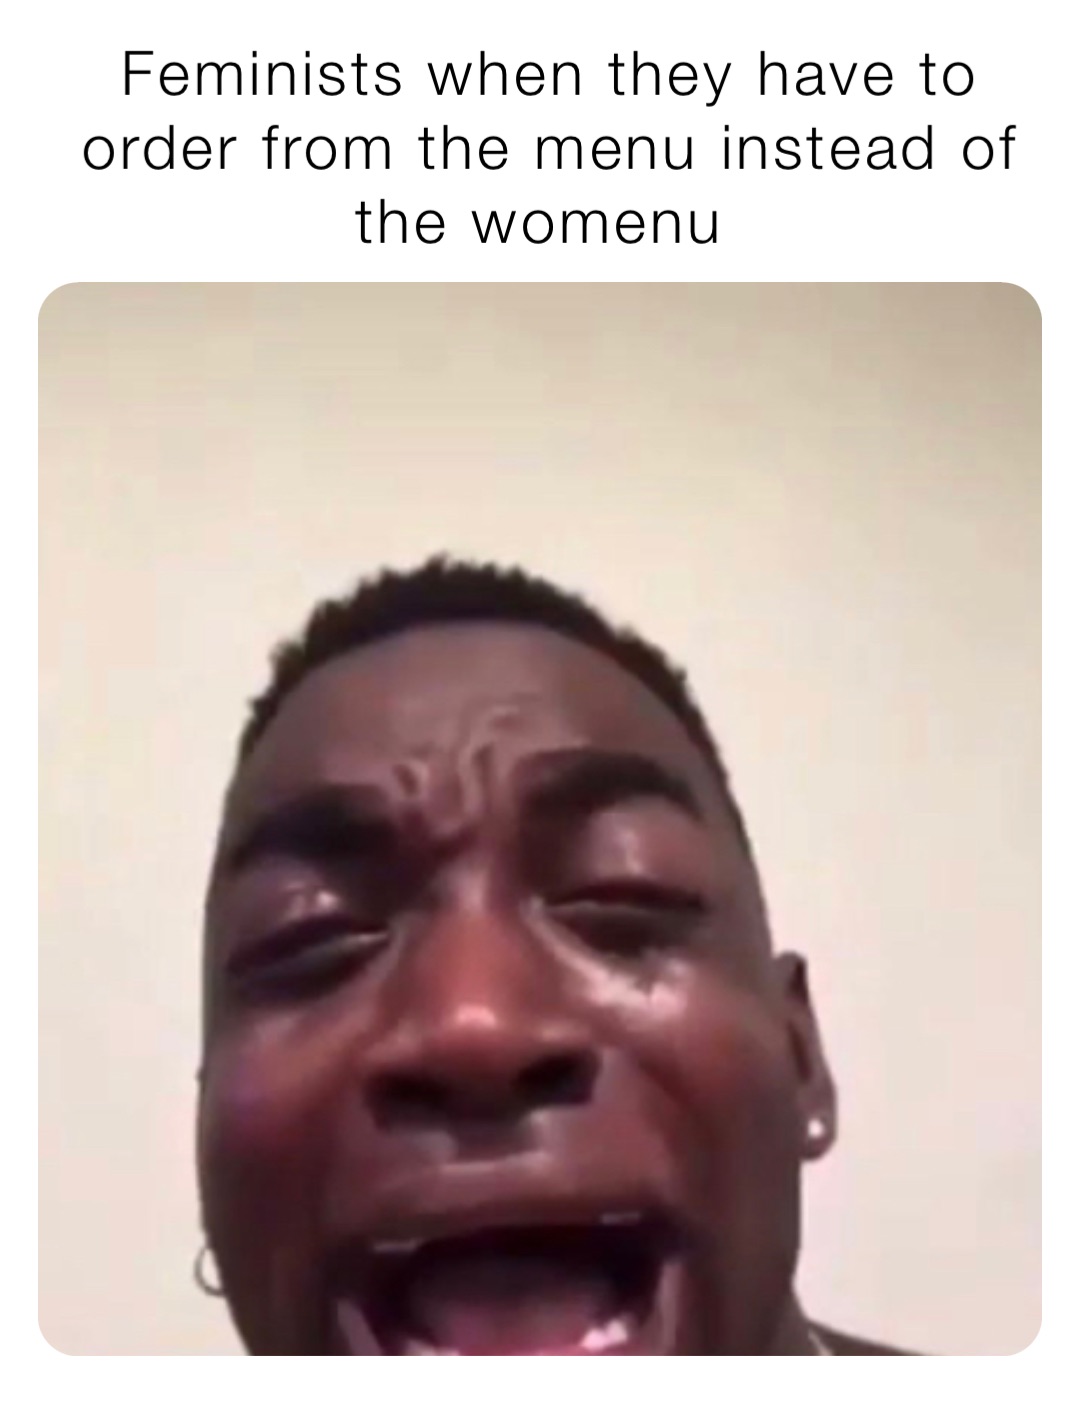 Feminists when they have to order from the menu instead of the womenu